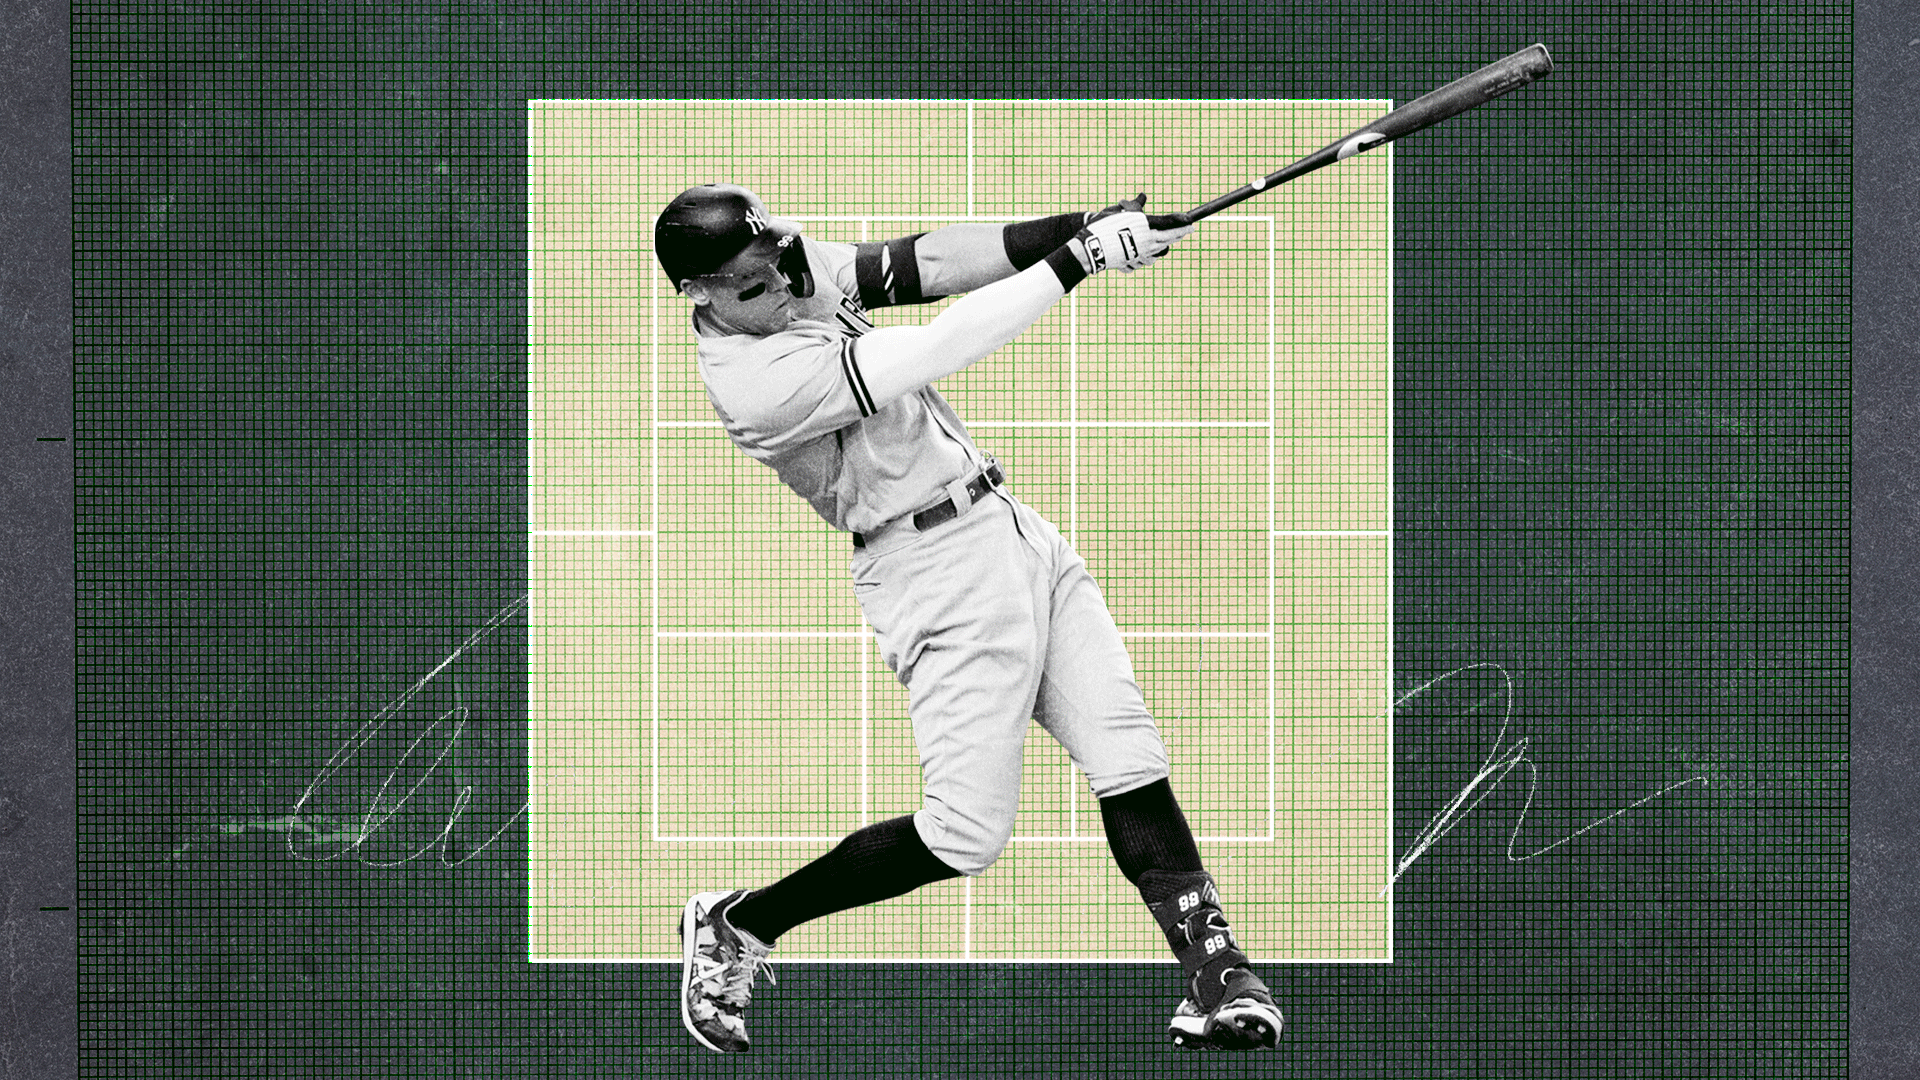 Photo Illustration of Aaron Judge swinging at bat with a grid behind him